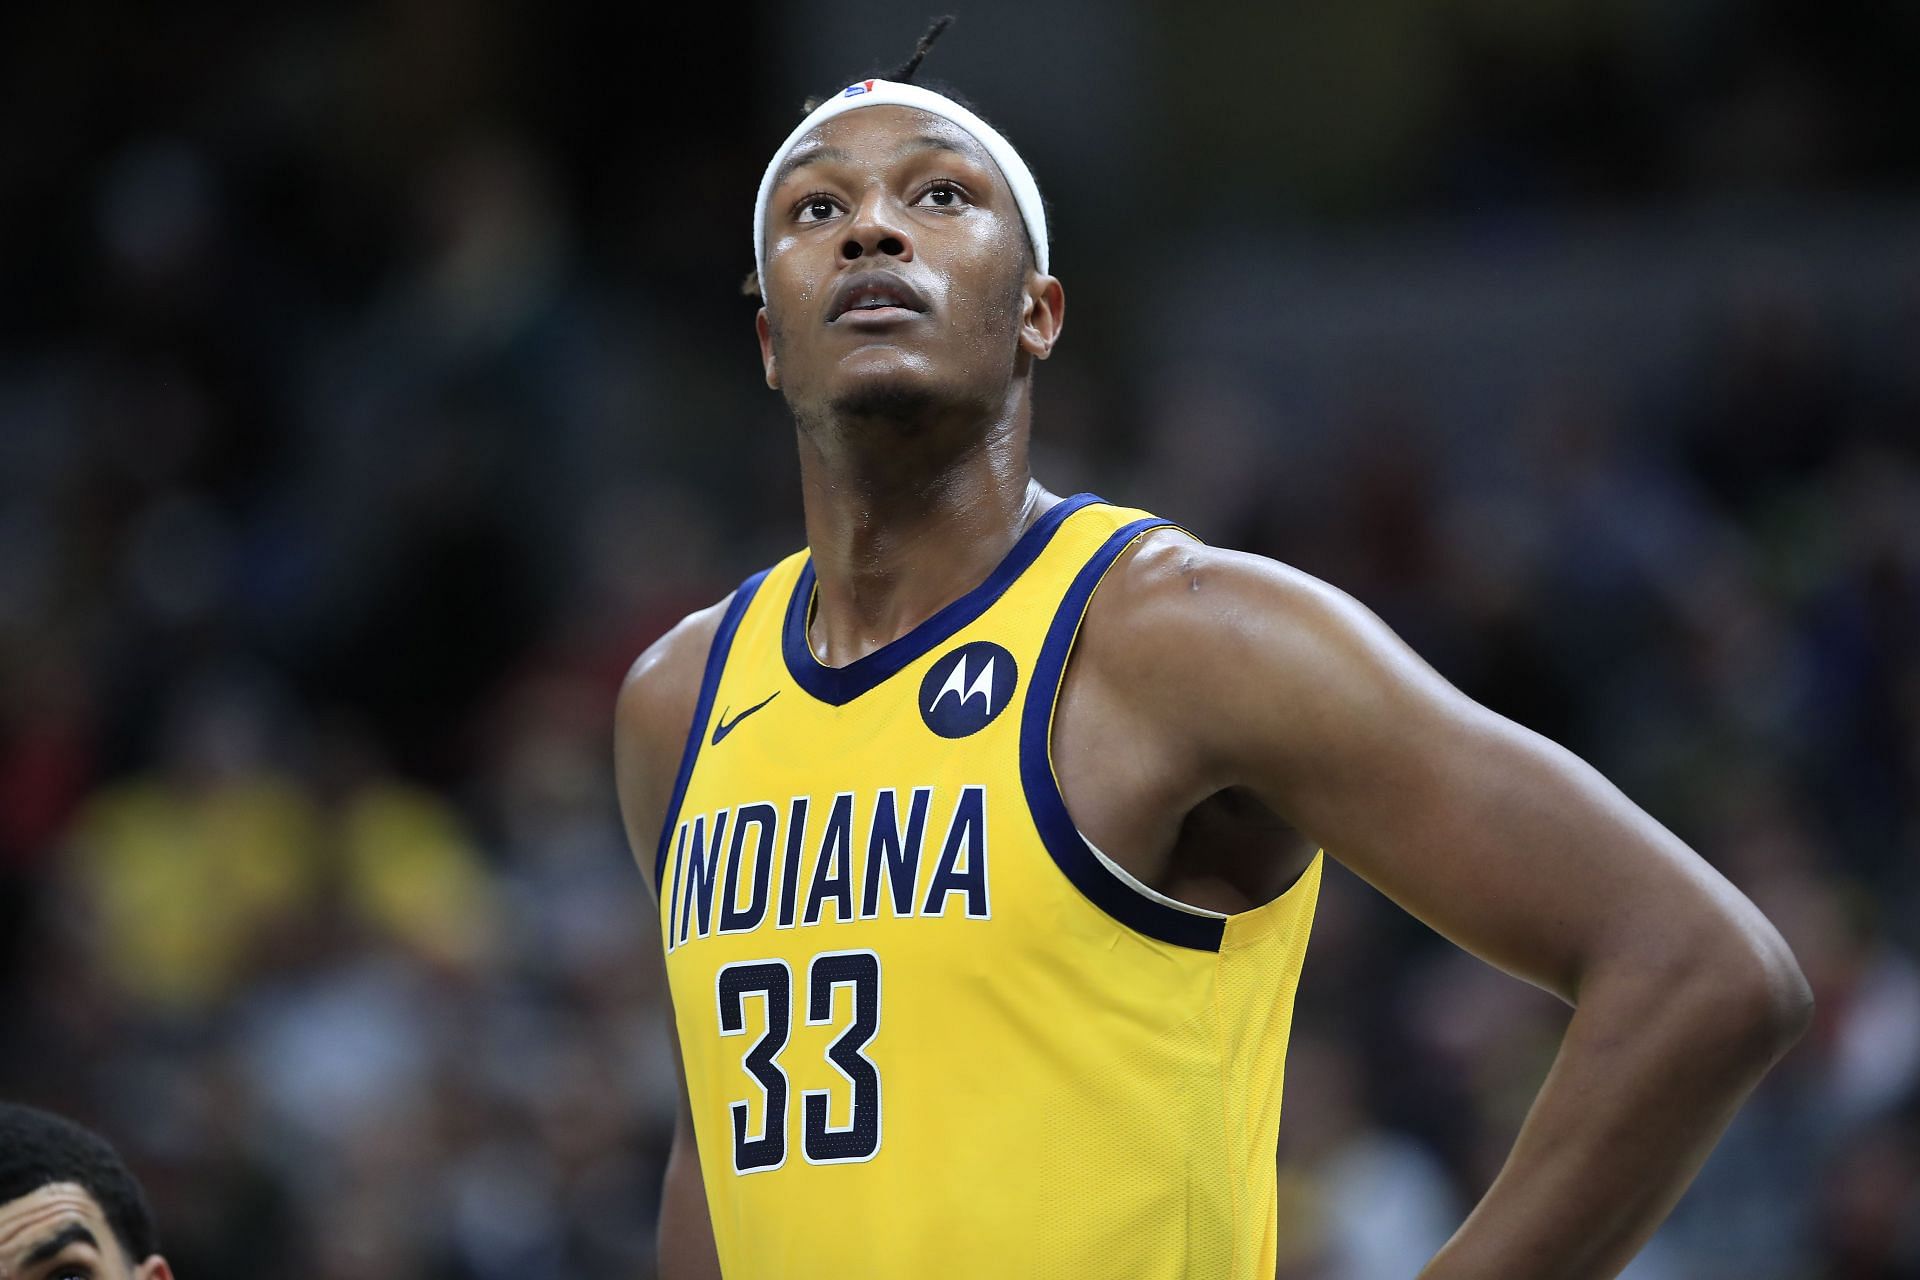 Myles Turner #33 of the Indiana Pacers watches the action against the Sacramento Kings at Bankers Life Fieldhouse on December 20, 2019 in Indianapolis, Indiana.